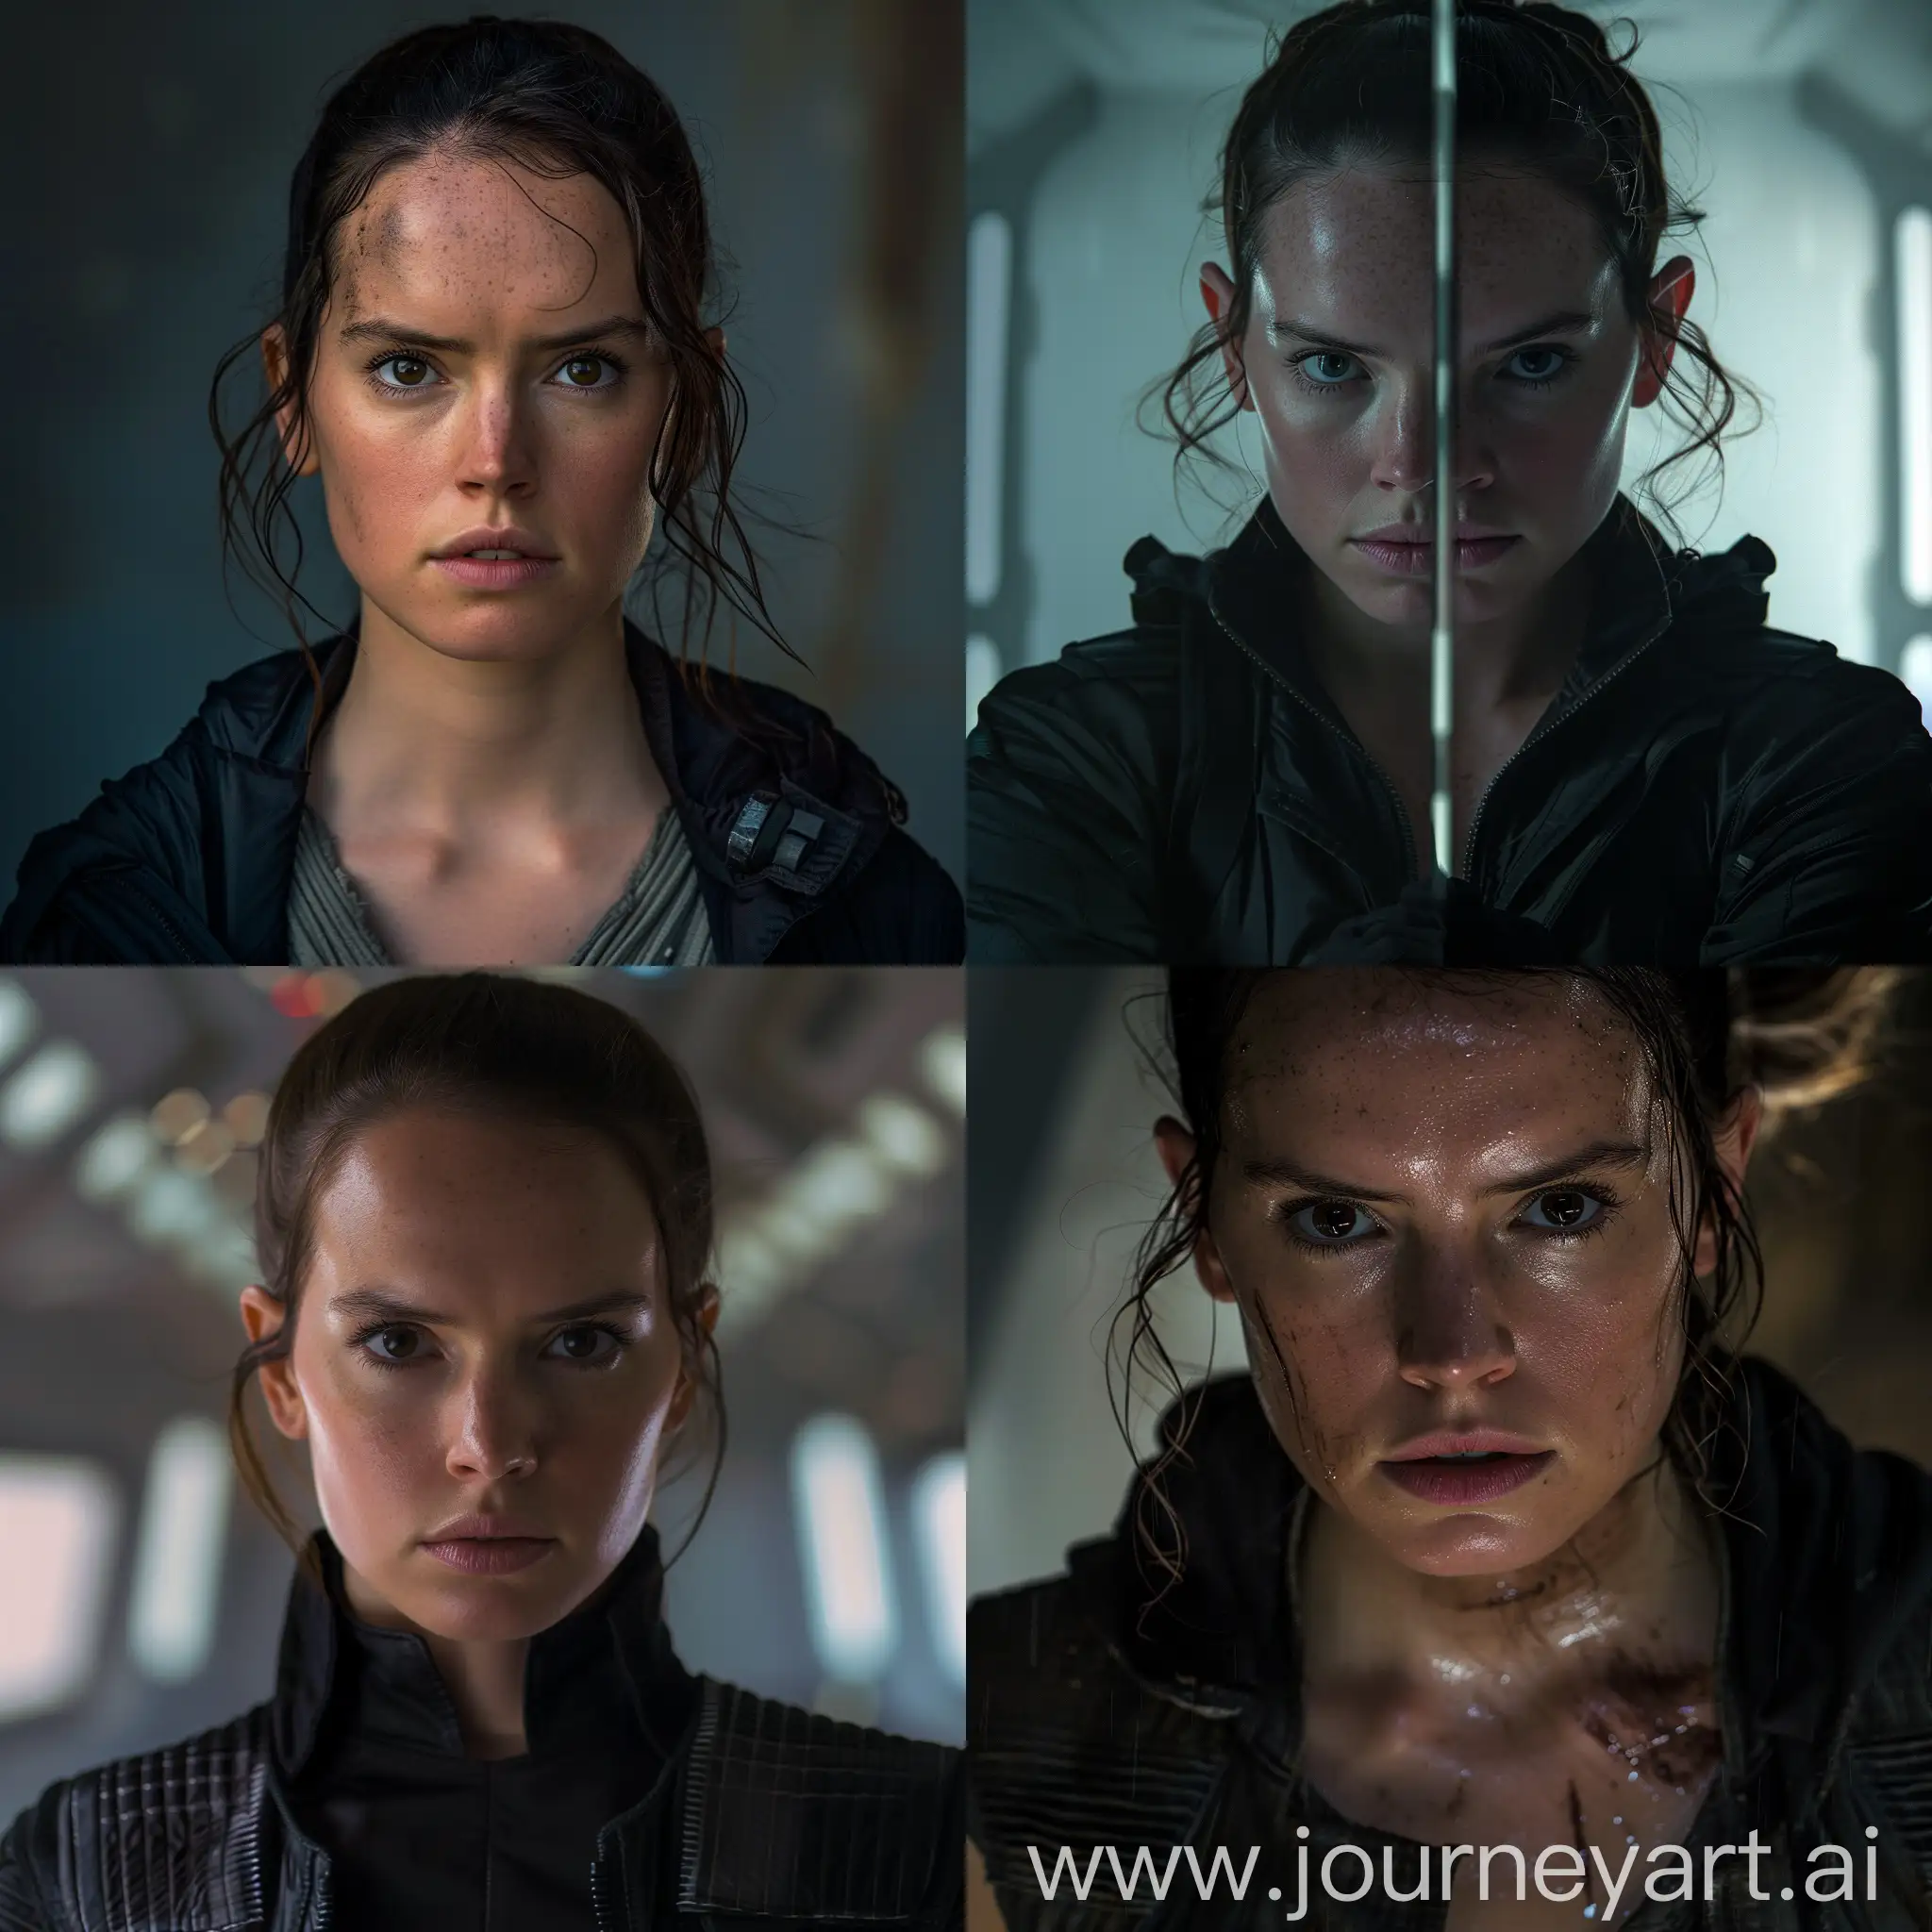 actress Daisy Ridley With Rey Skywalker's face, With Black jacket in iconic scenes from the films Mission Impossible, in 8k resolution